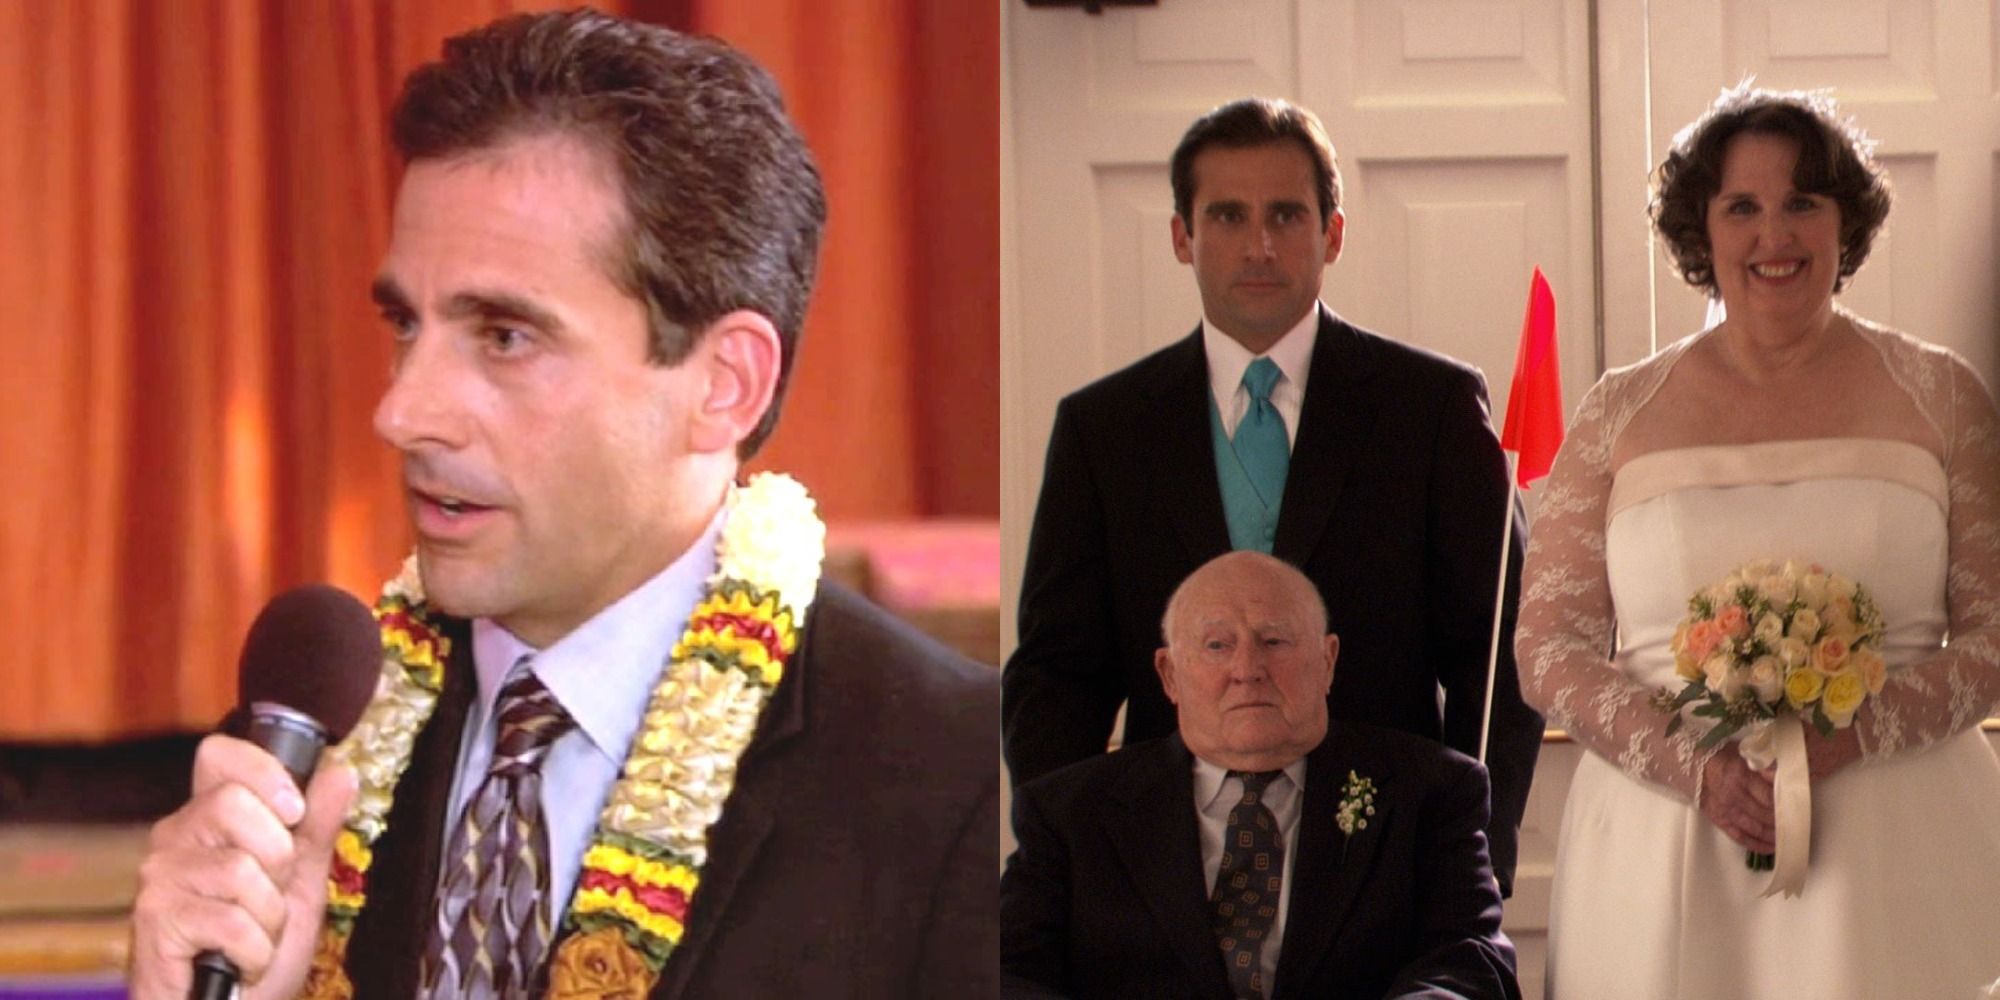 An image of Michael making a speech and Phyllis and her father walking down the aisle in The Office